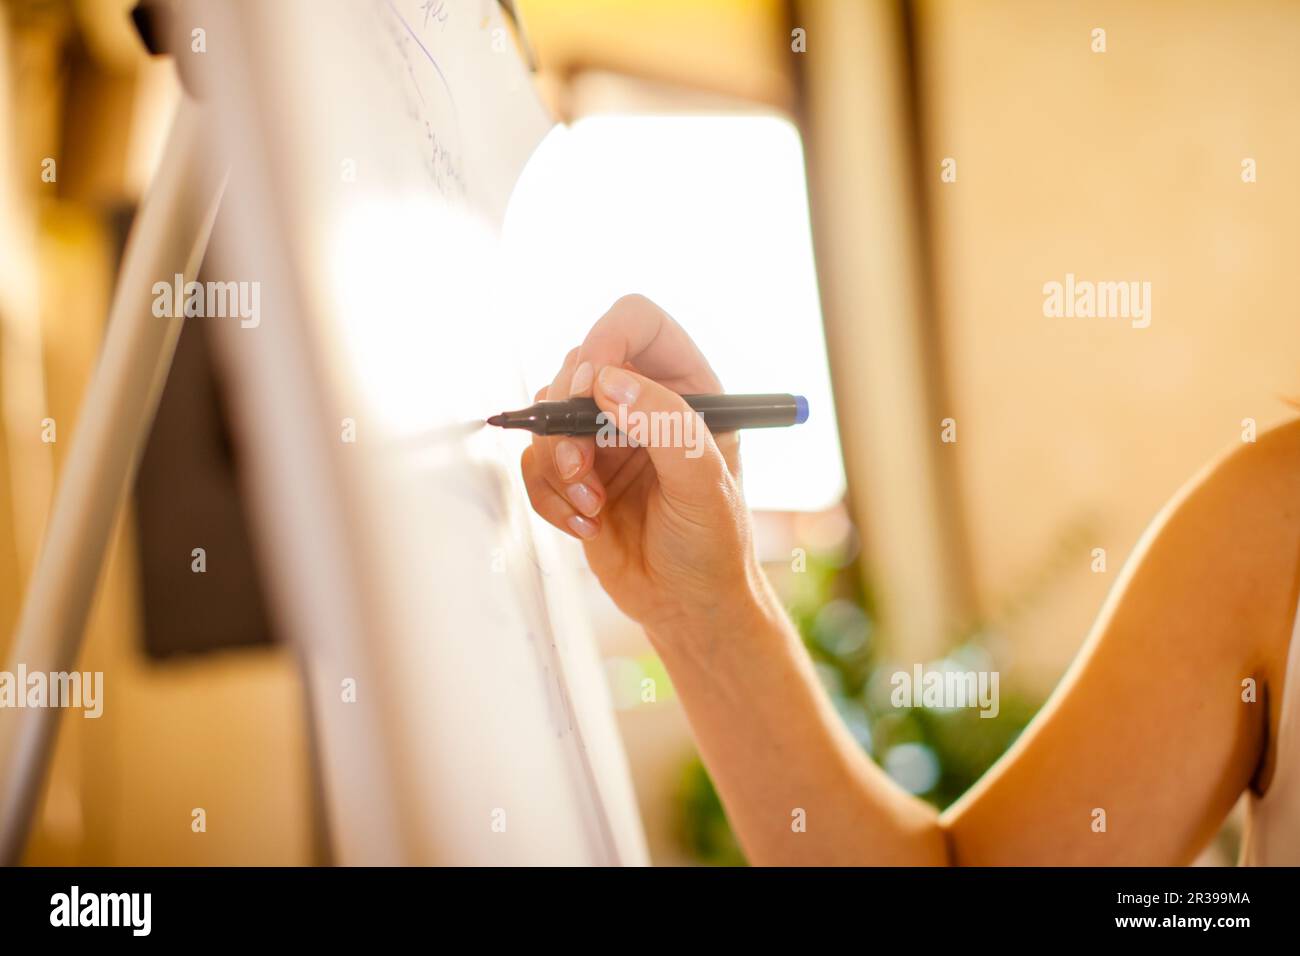 Female writes something with a marker on white board. Stock Photo